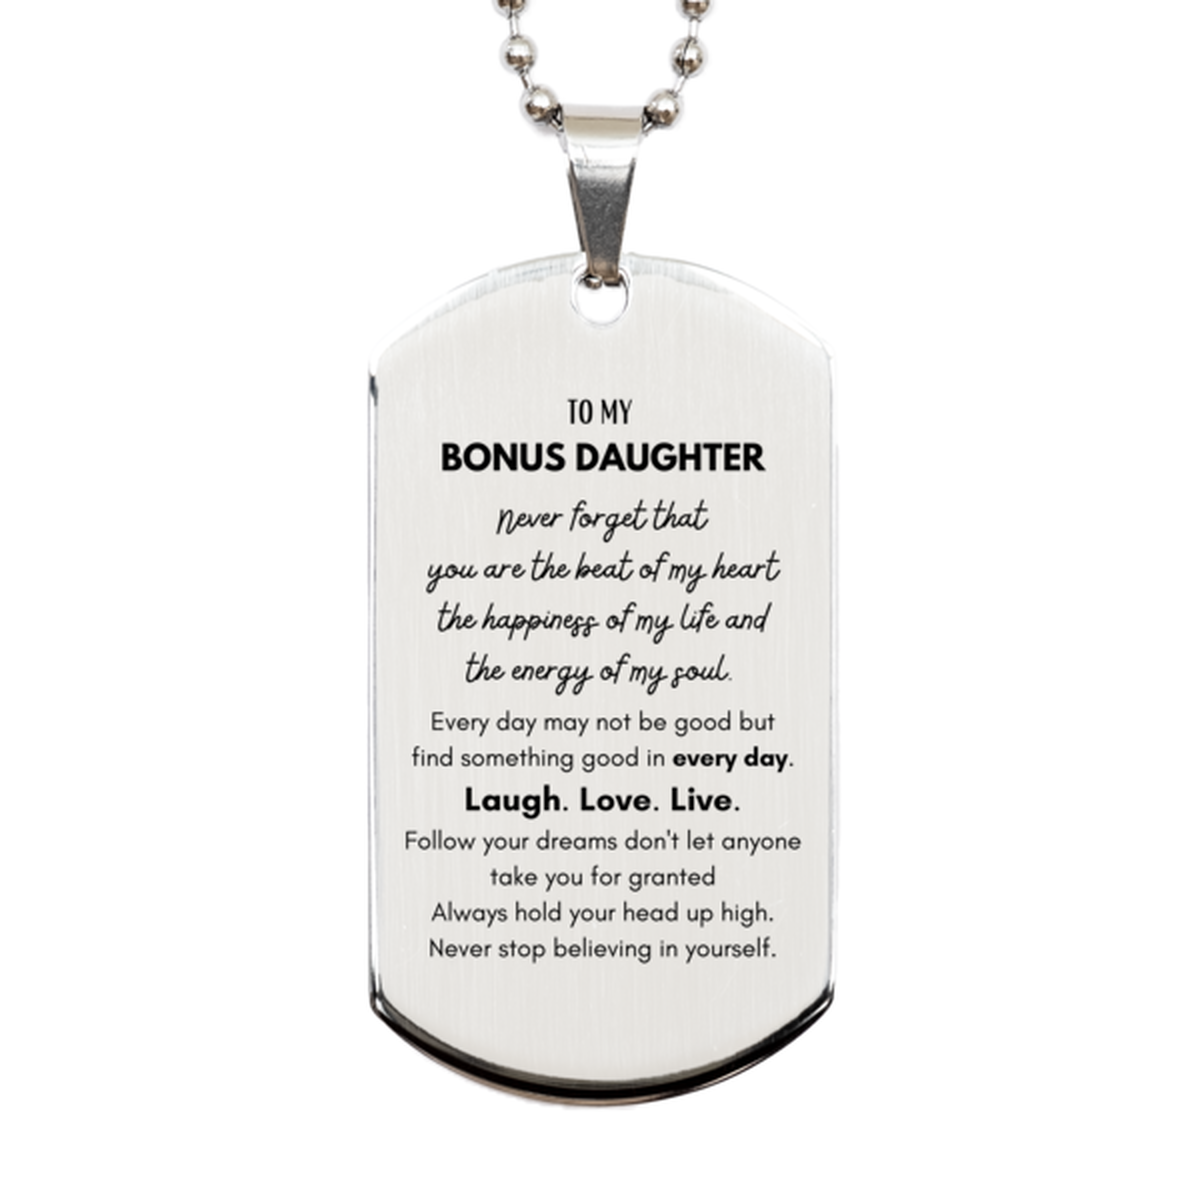 To My Bonus Daughter Dogtag Gifts, Christmas Bonus Daughter Silver Dog Tag Present, Birthday Unique Motivational For Bonus Daughter, To My Bonus Daughter Never forget that you are the beat of my heart the happiness of my life and the energy of my soul